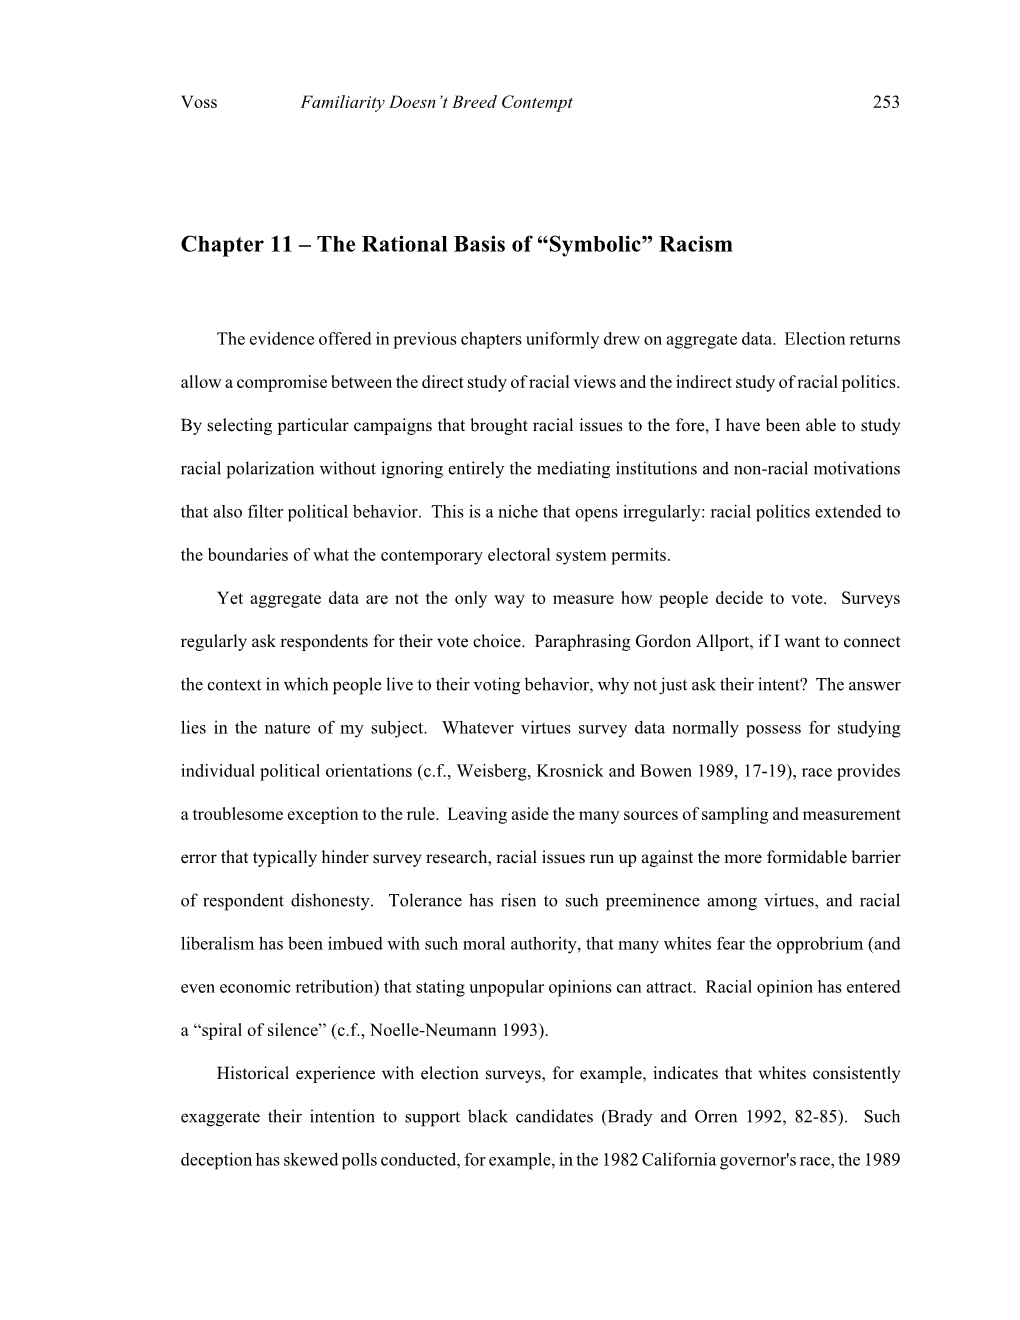 Chapter 11 – the Rational Basis of “Symbolic” Racism